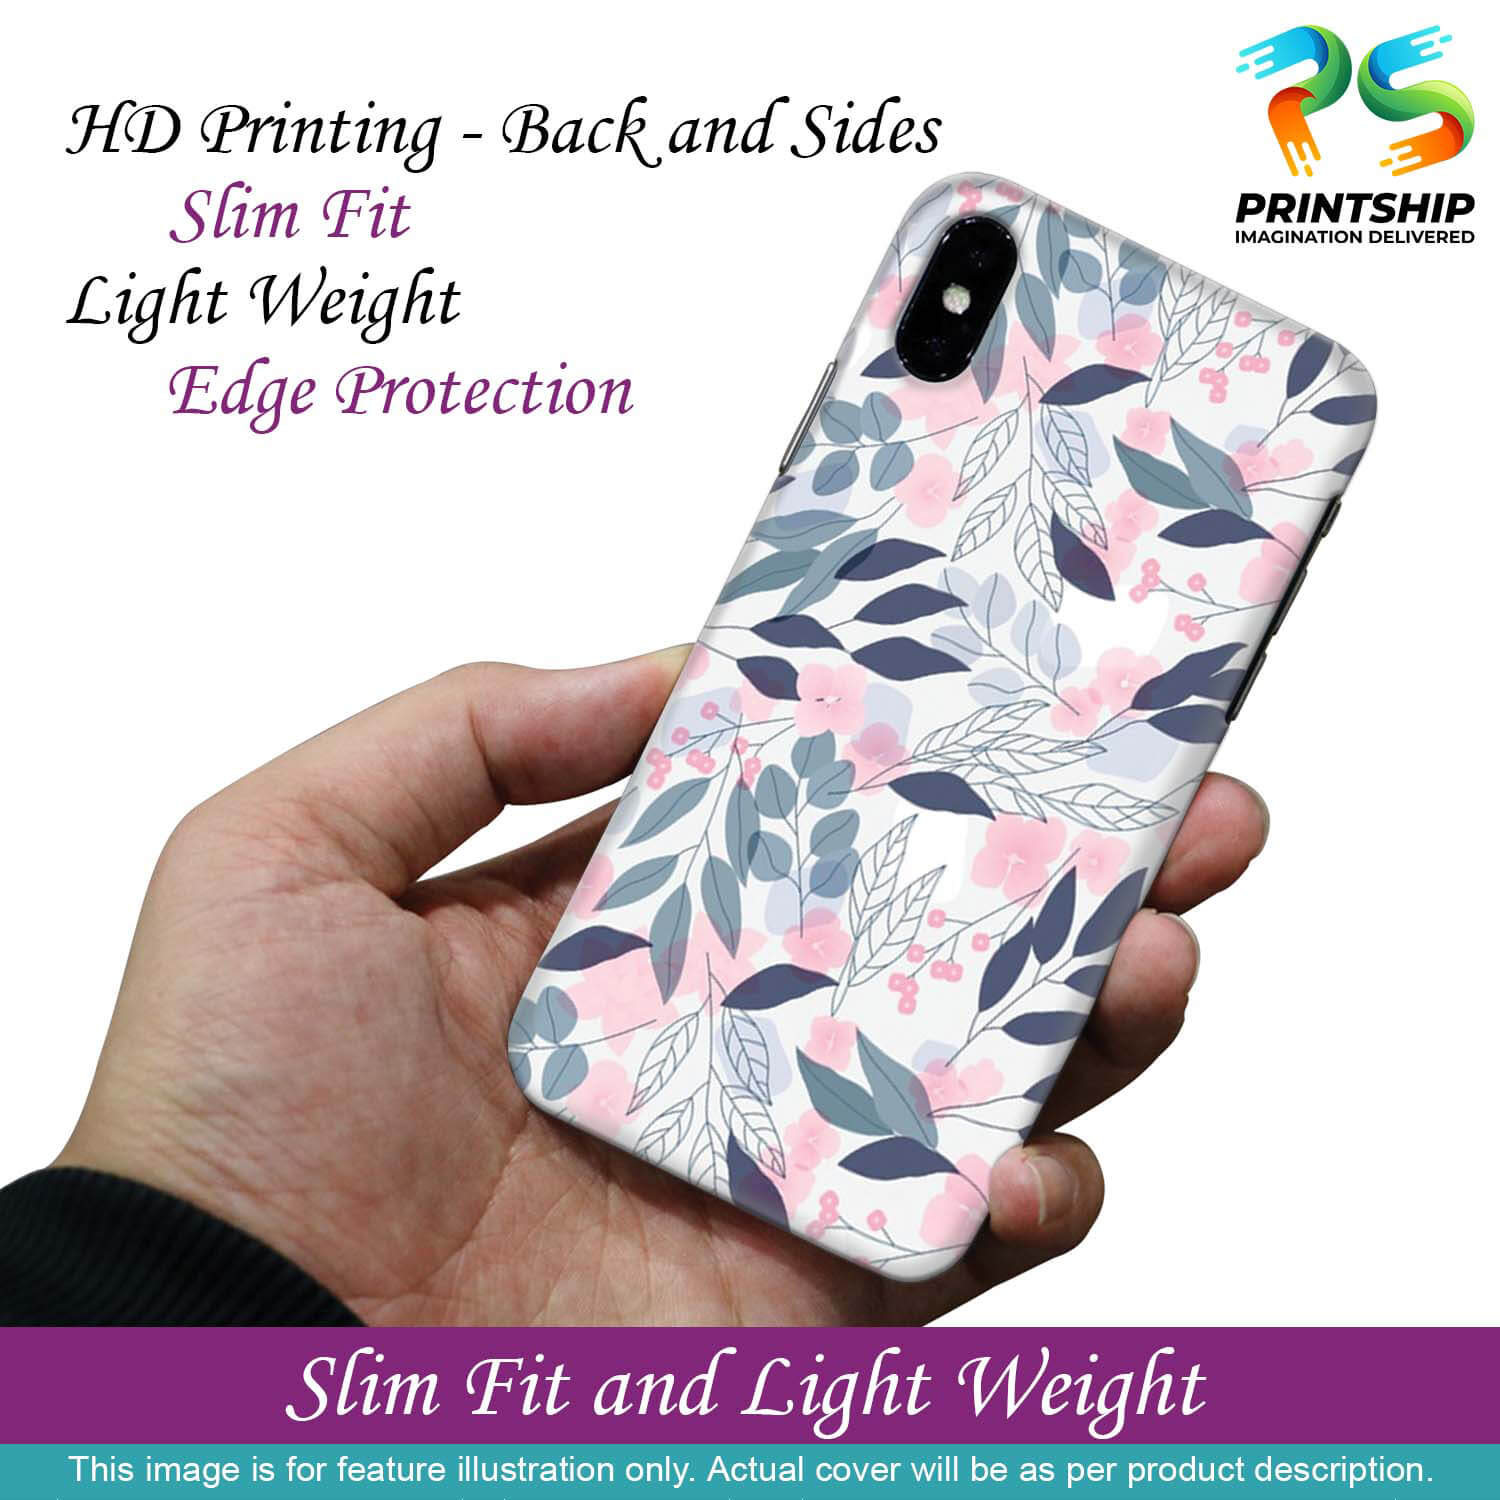 PS1333-Flowery Patterns Back Cover for Samsung Galaxy A22 5G